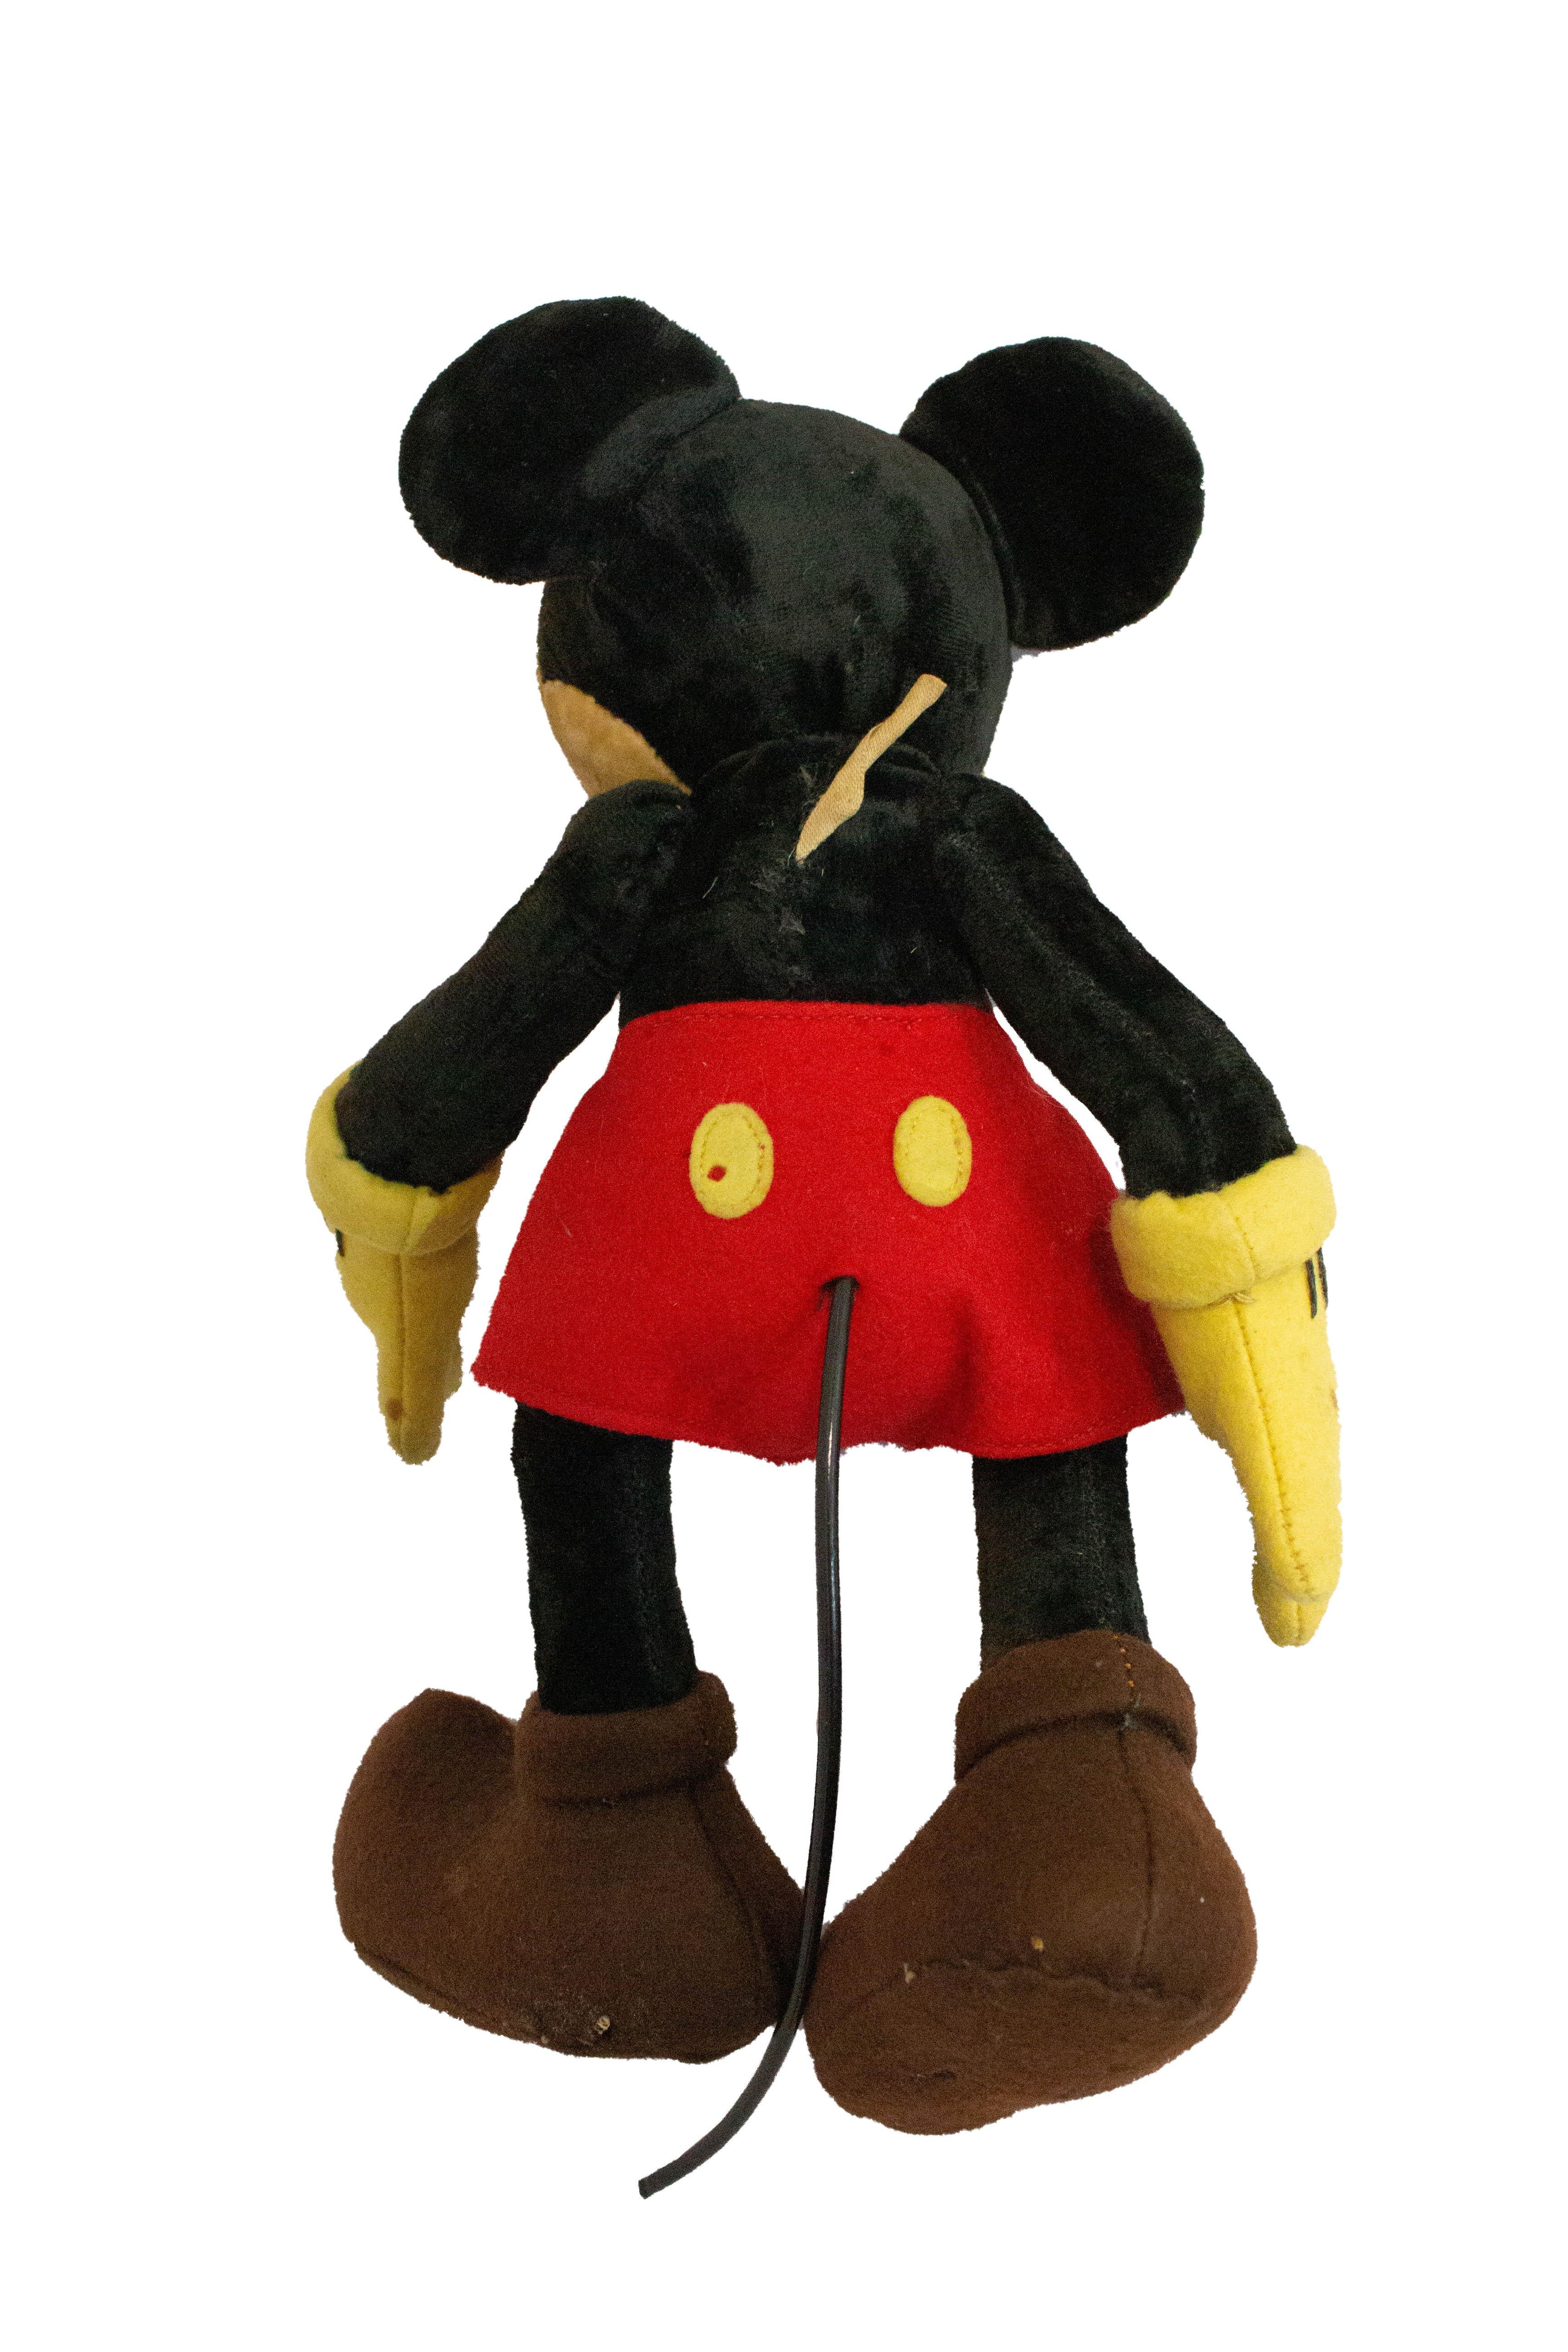 off brand mickey mouse